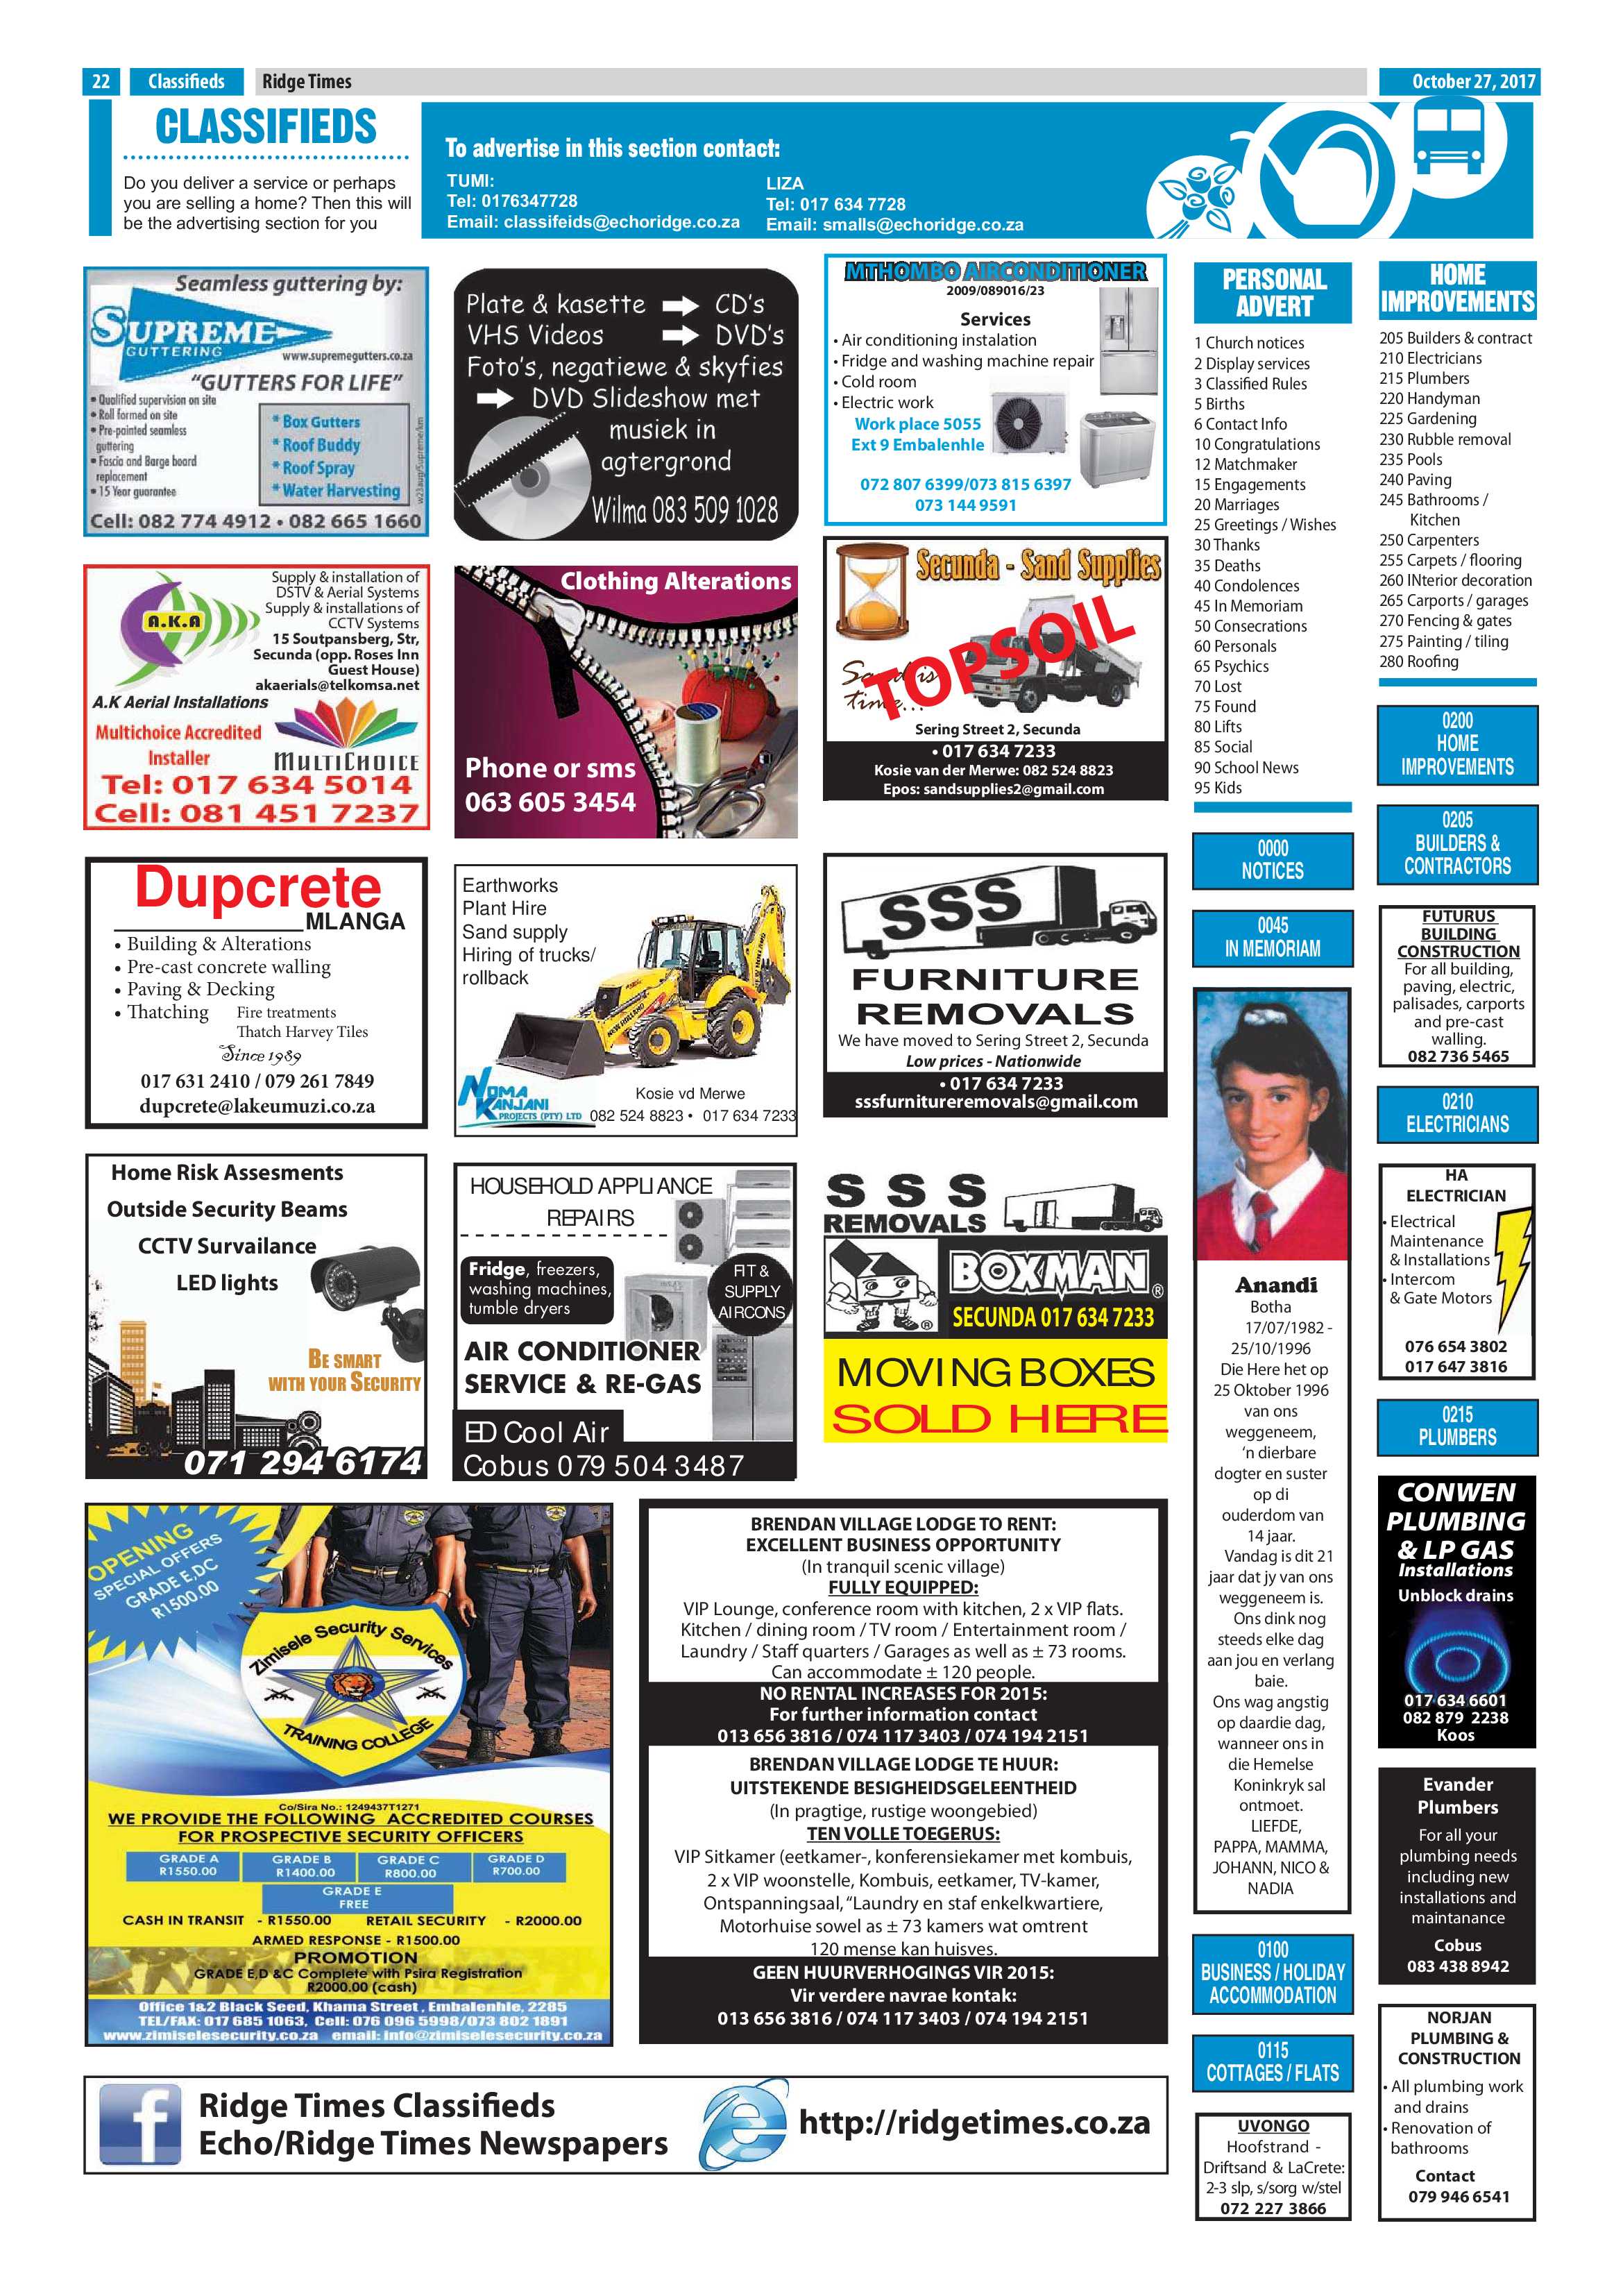 Ridge Times, 27 October 2017 page 22